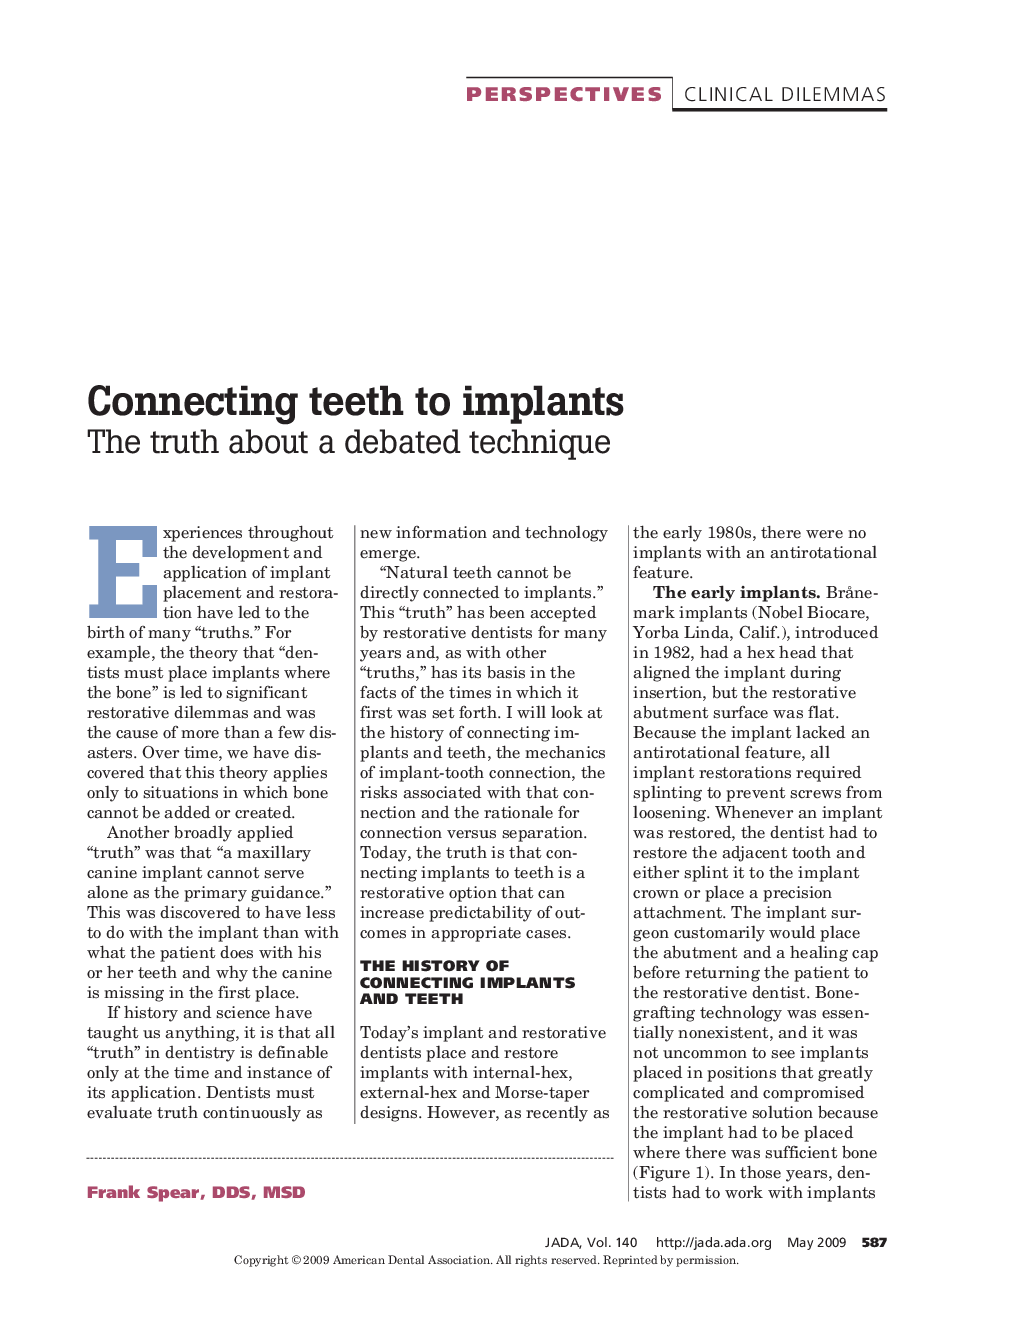 Connecting Teeth to Implants